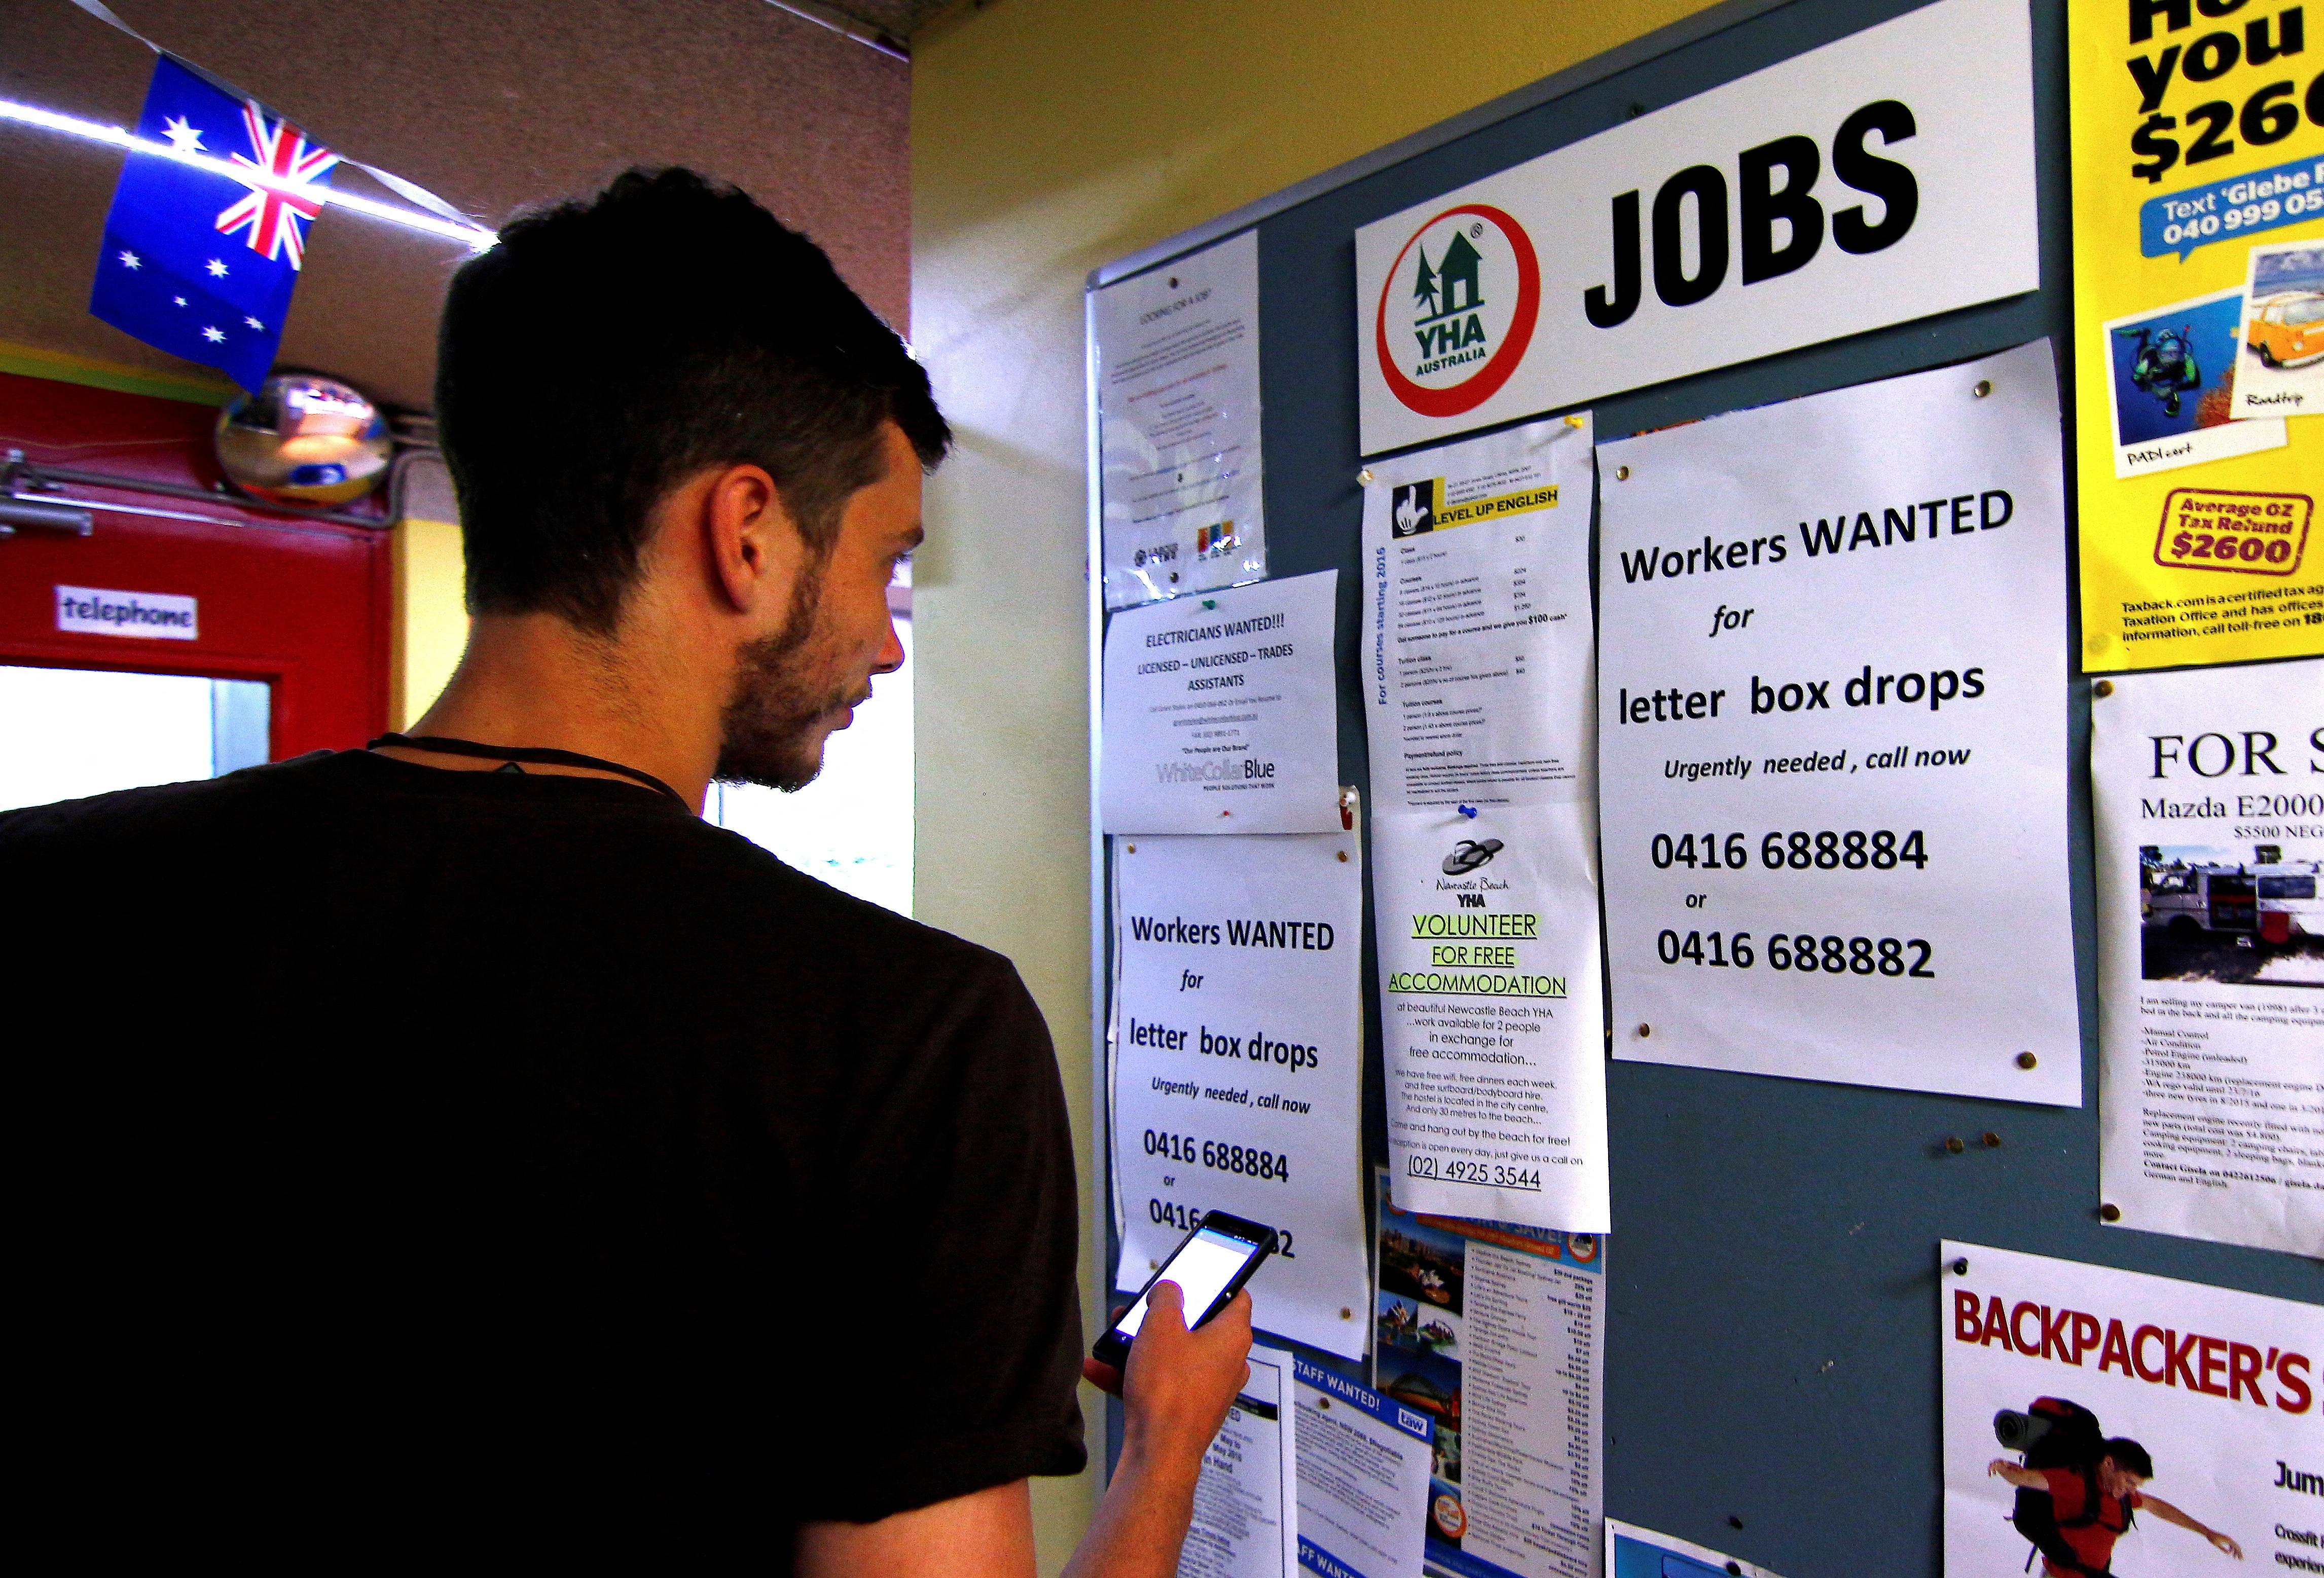 A man uses his phone to record a job add posted on a notice board at a backpacker hostel in Sydney, Australia